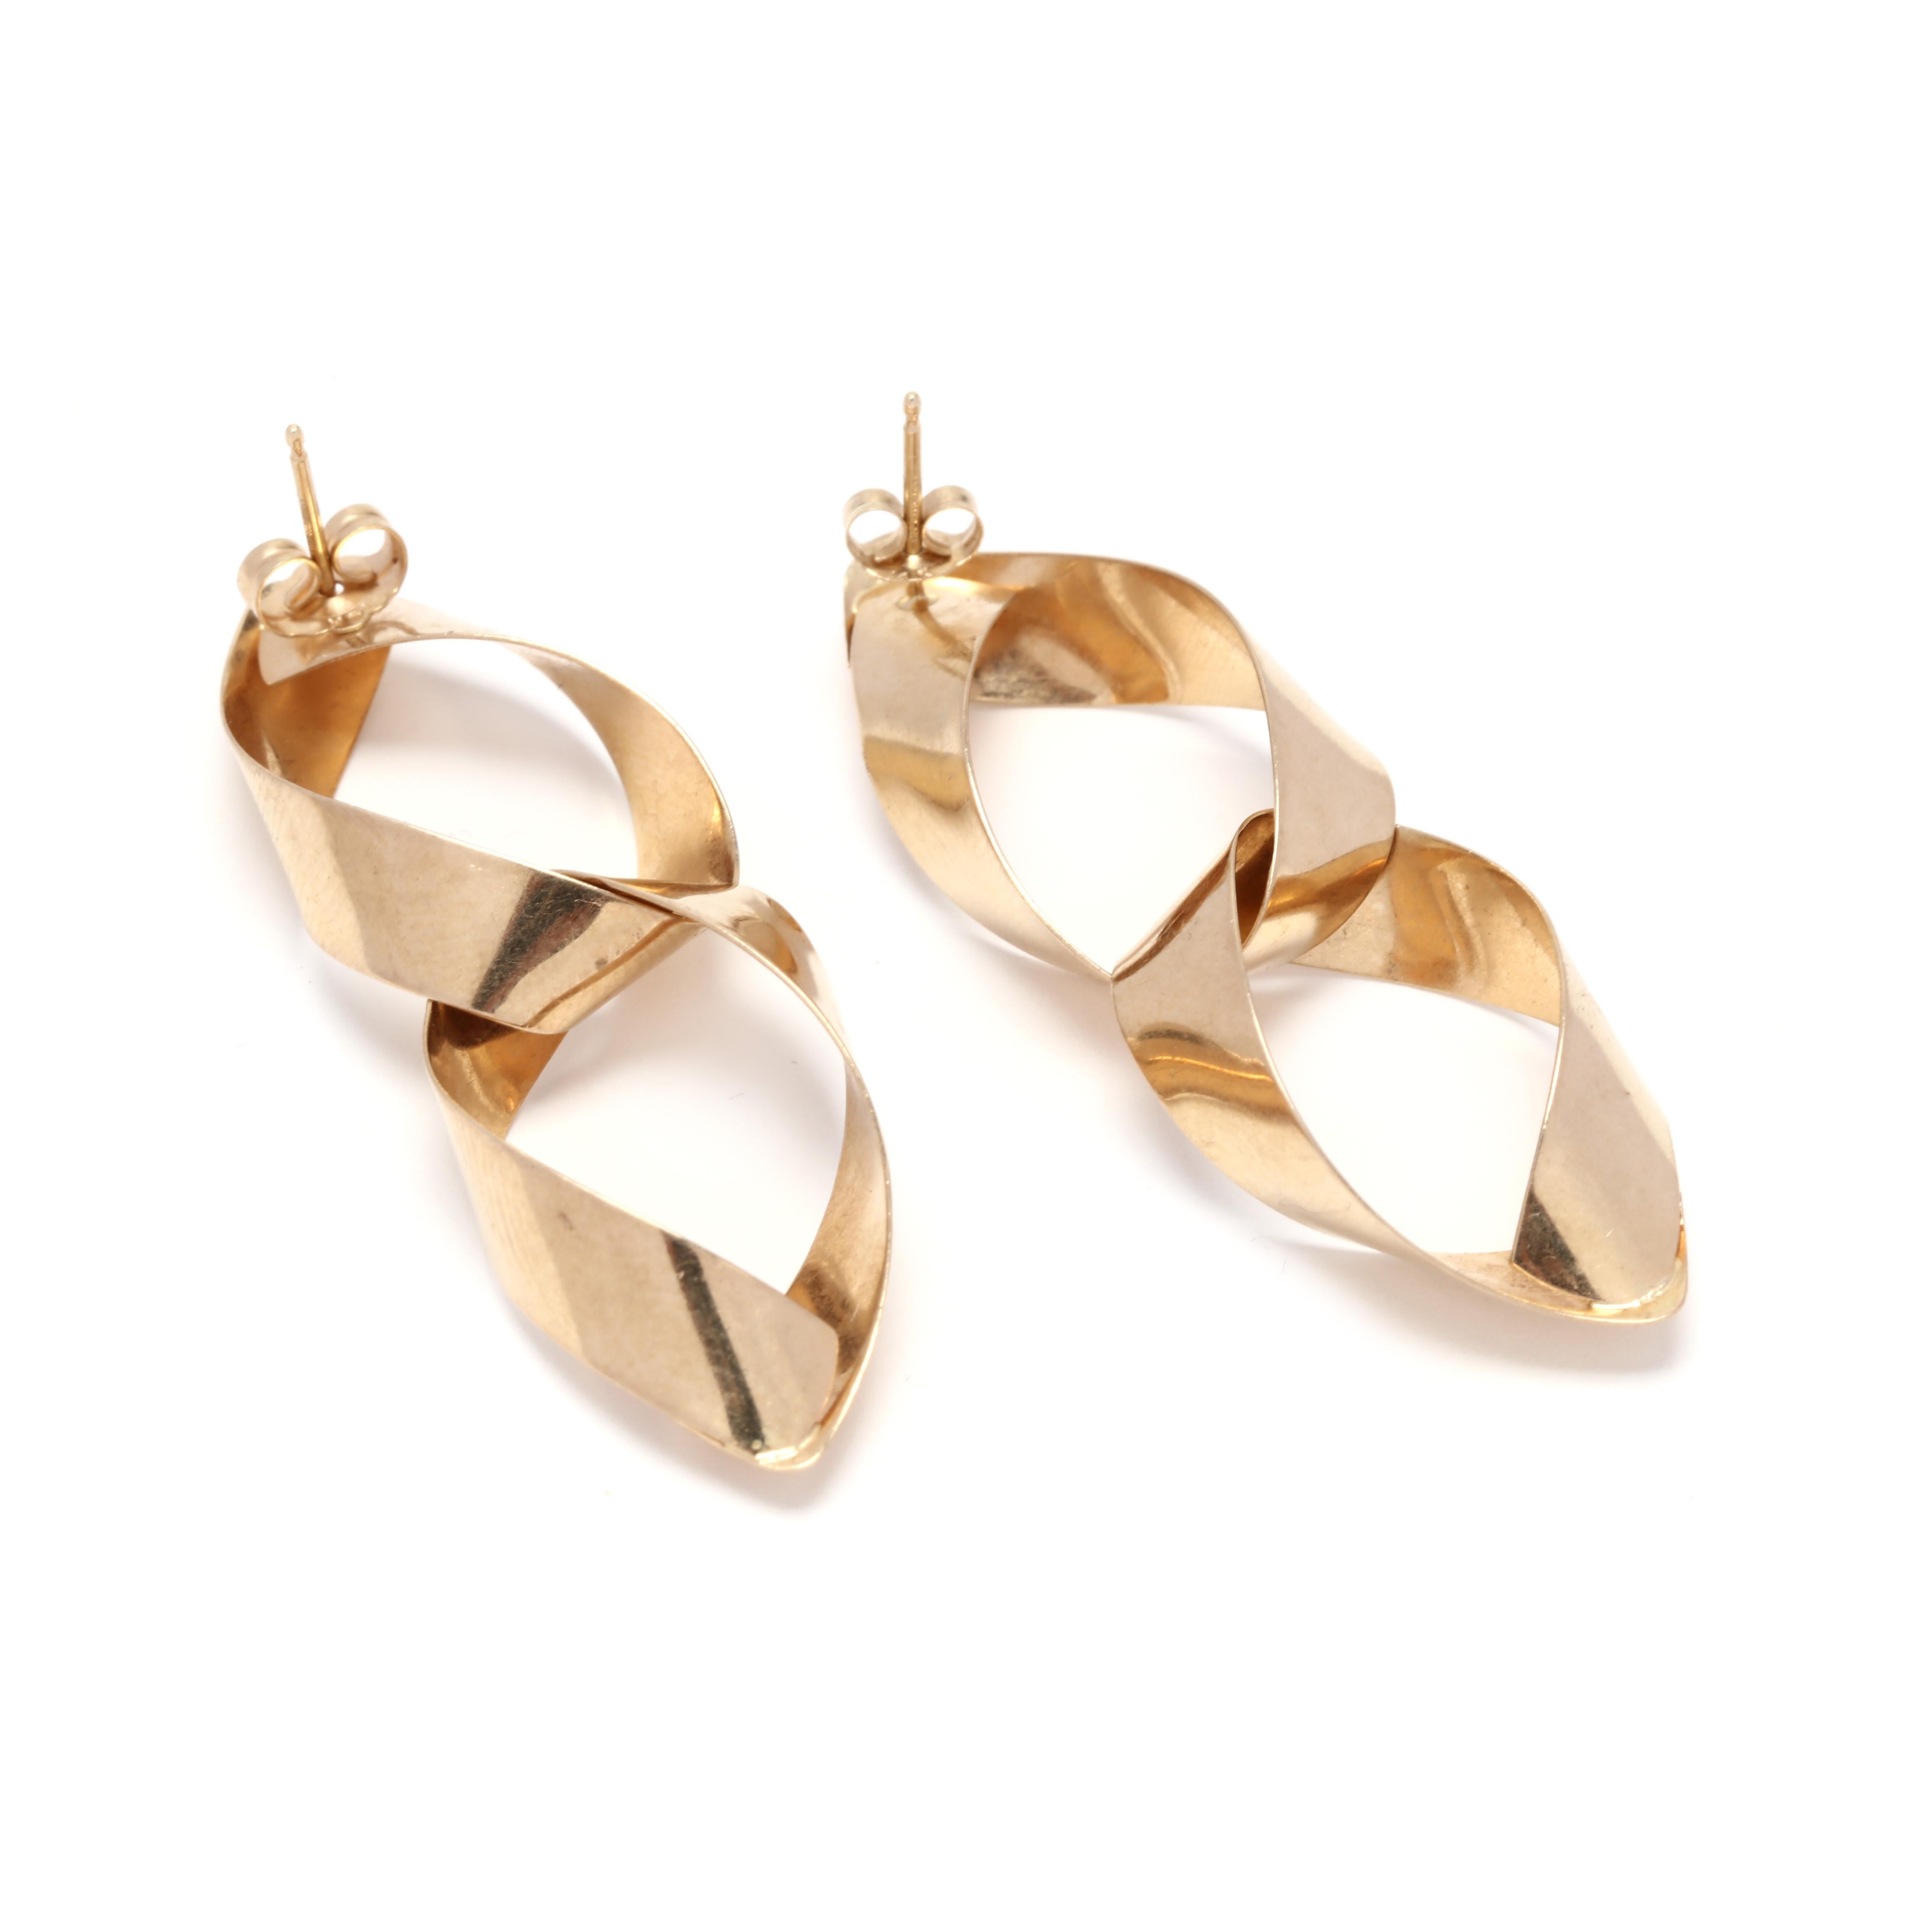 A pair of 14 karat yellow gold double pear shape ribbon dangle earrings. These earrings feature two flat pear shapes dangles with pierced post backs.

Length: 1.75 in.

Width: 5/8 in.

3.6 dwts.

A Couple Of Things to Note:
* This is a vintage item